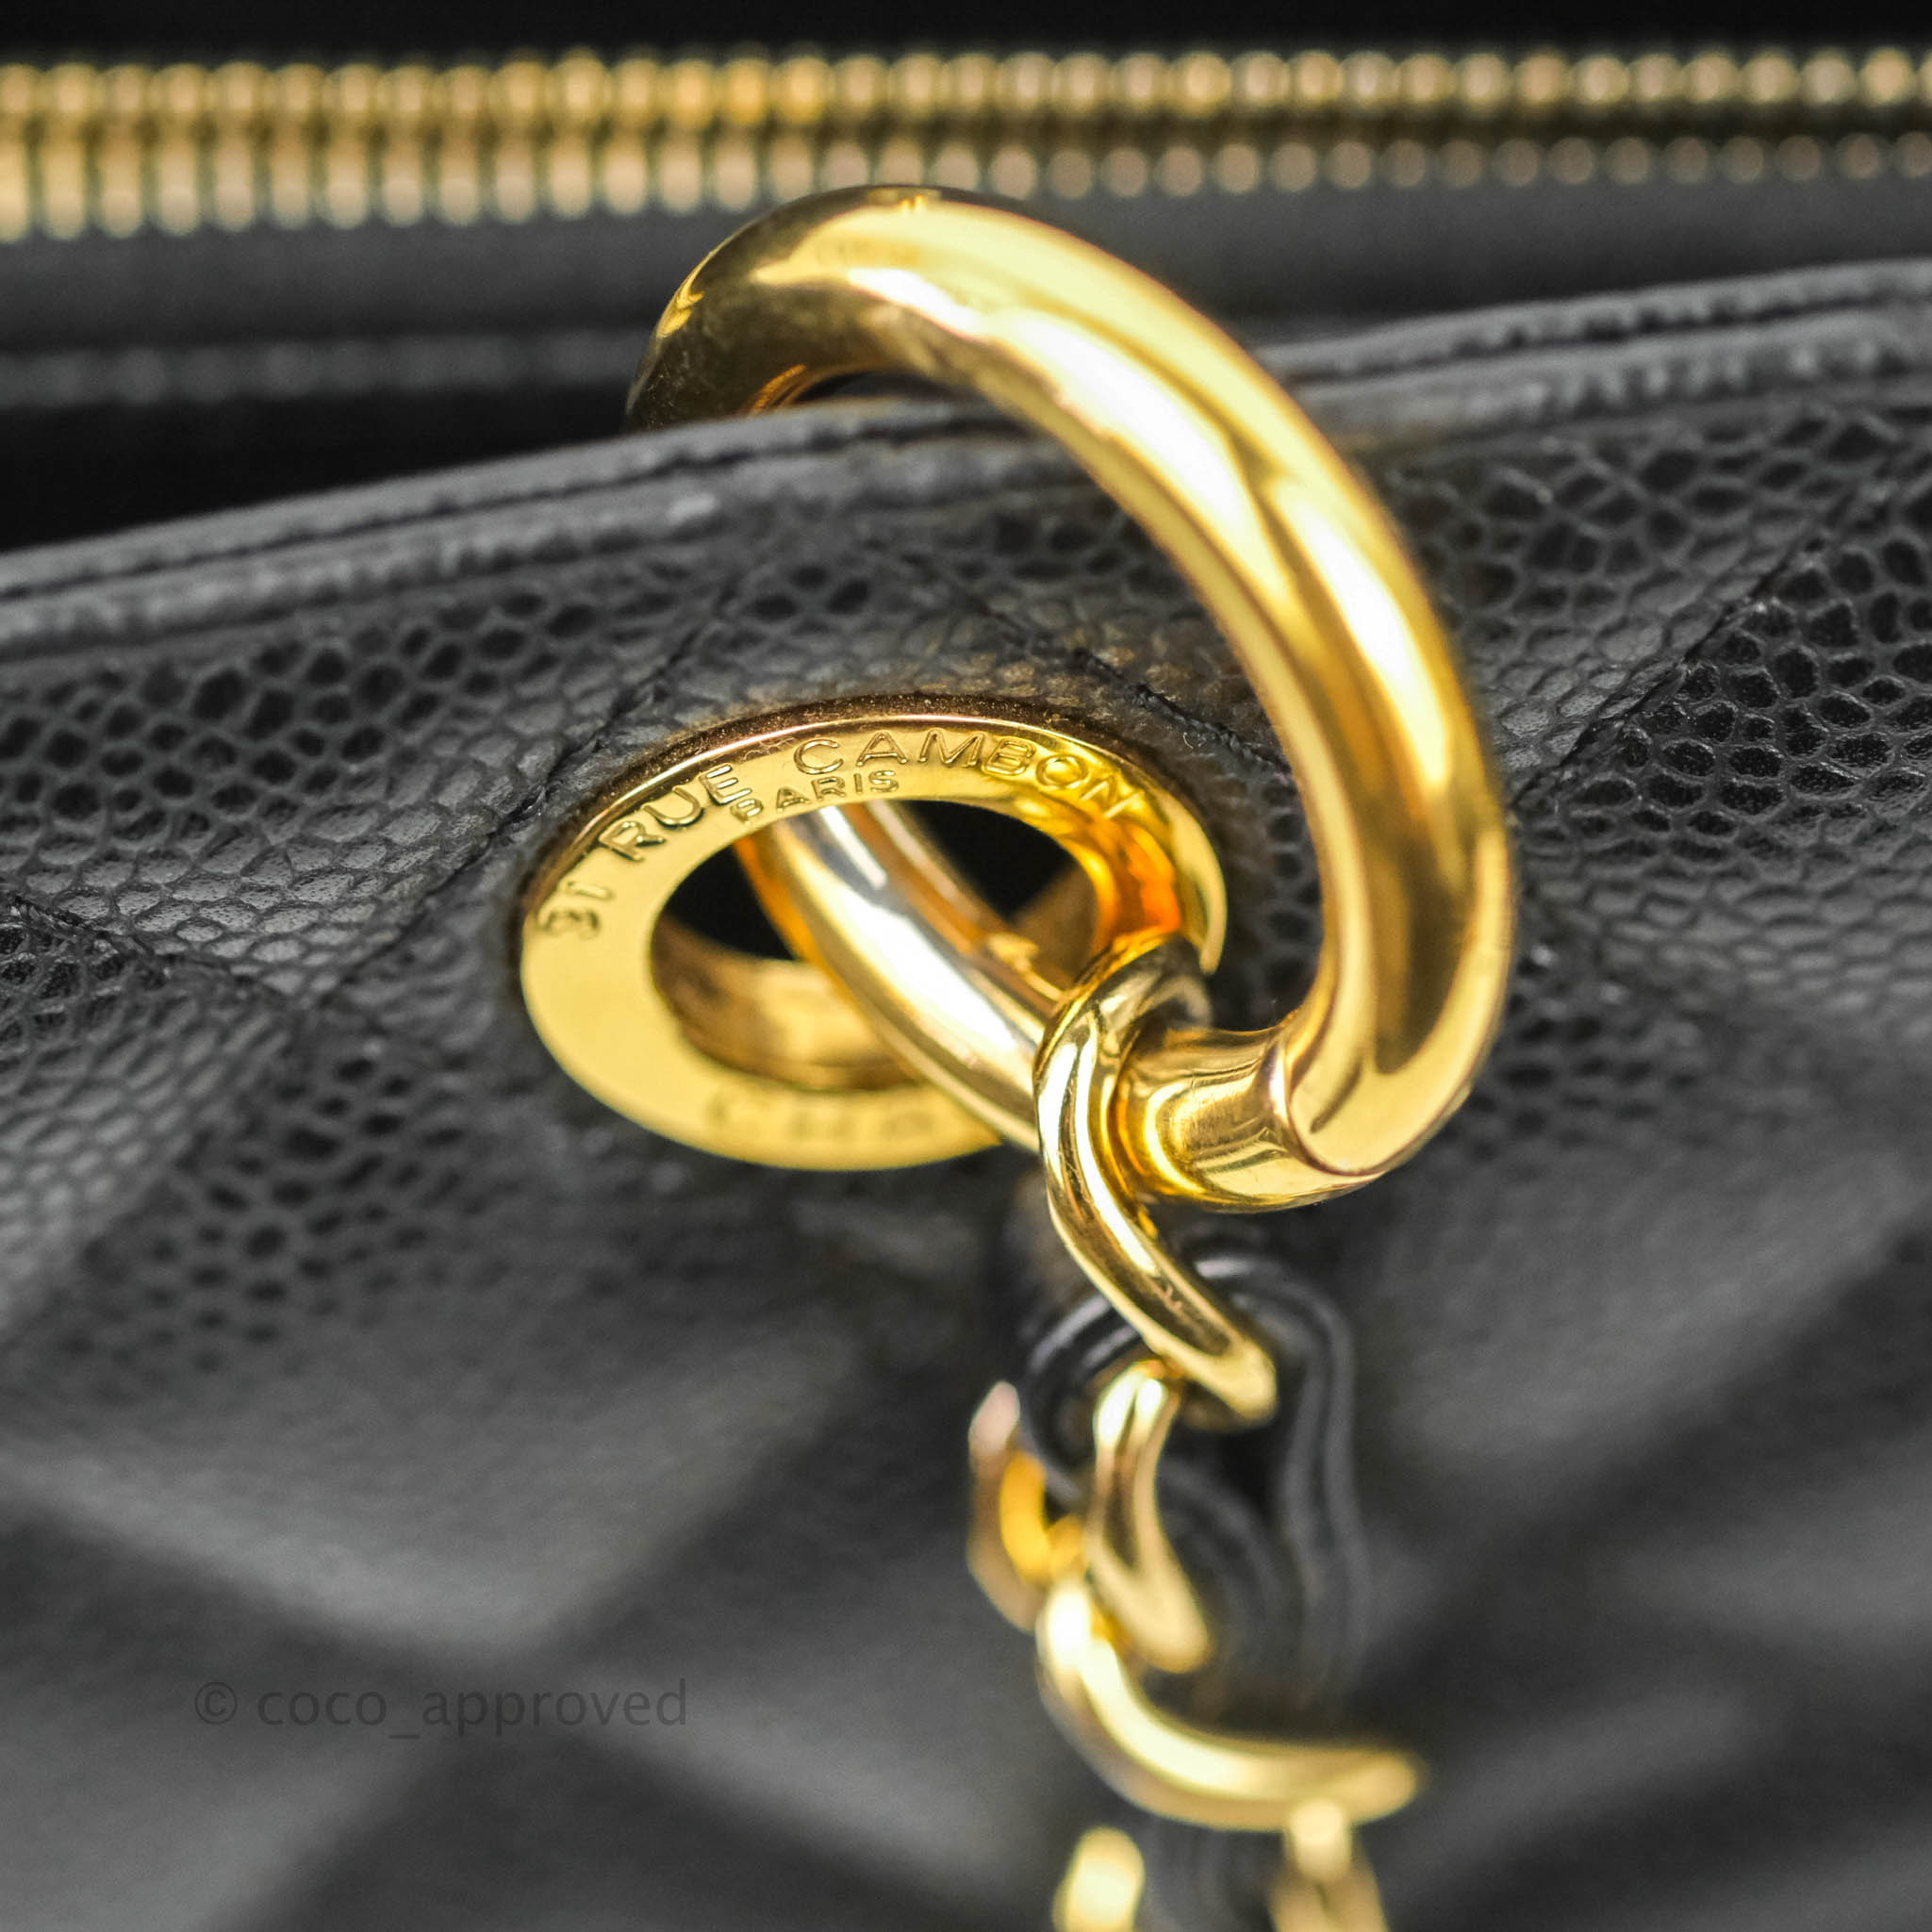 Chanel Black Caviar Leather Gold Hardware New | on Que Style